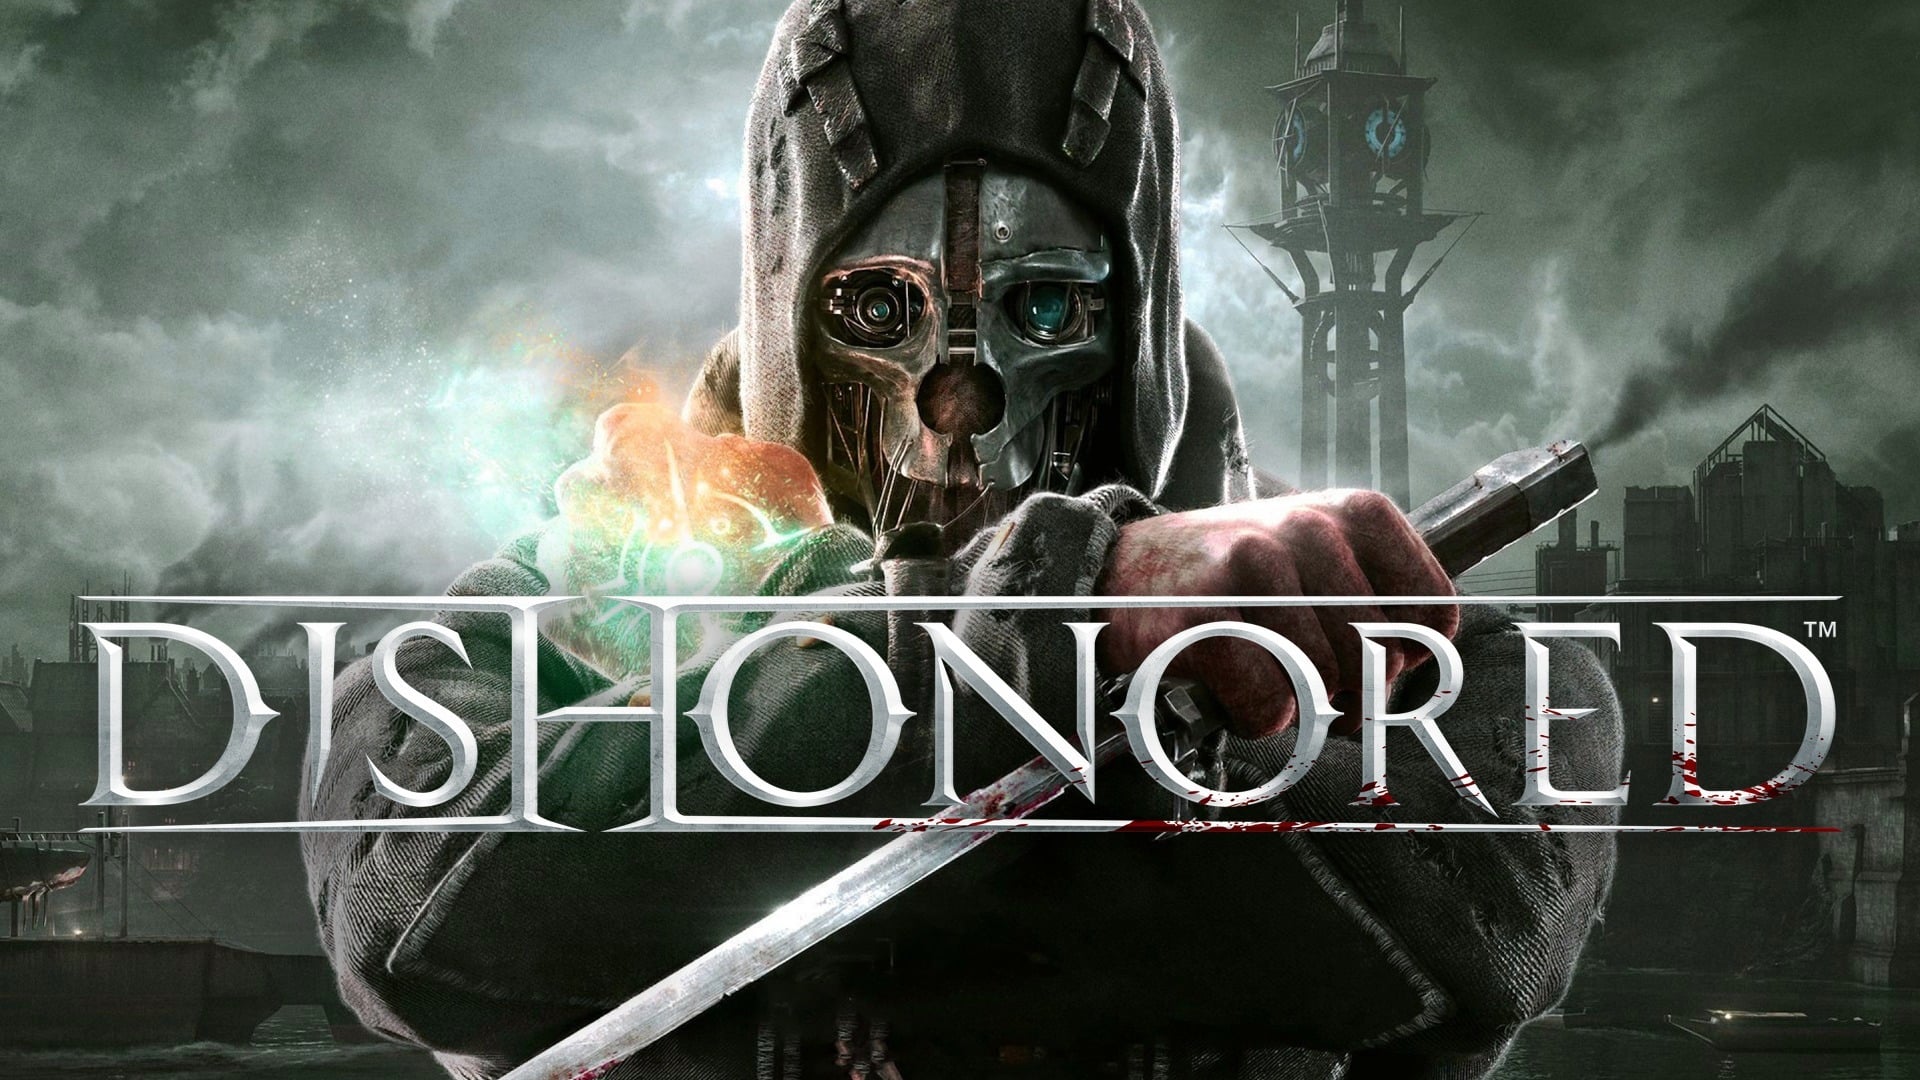 Dishonored-PC-Version-Full-Game-Free-Download-2019.jpg